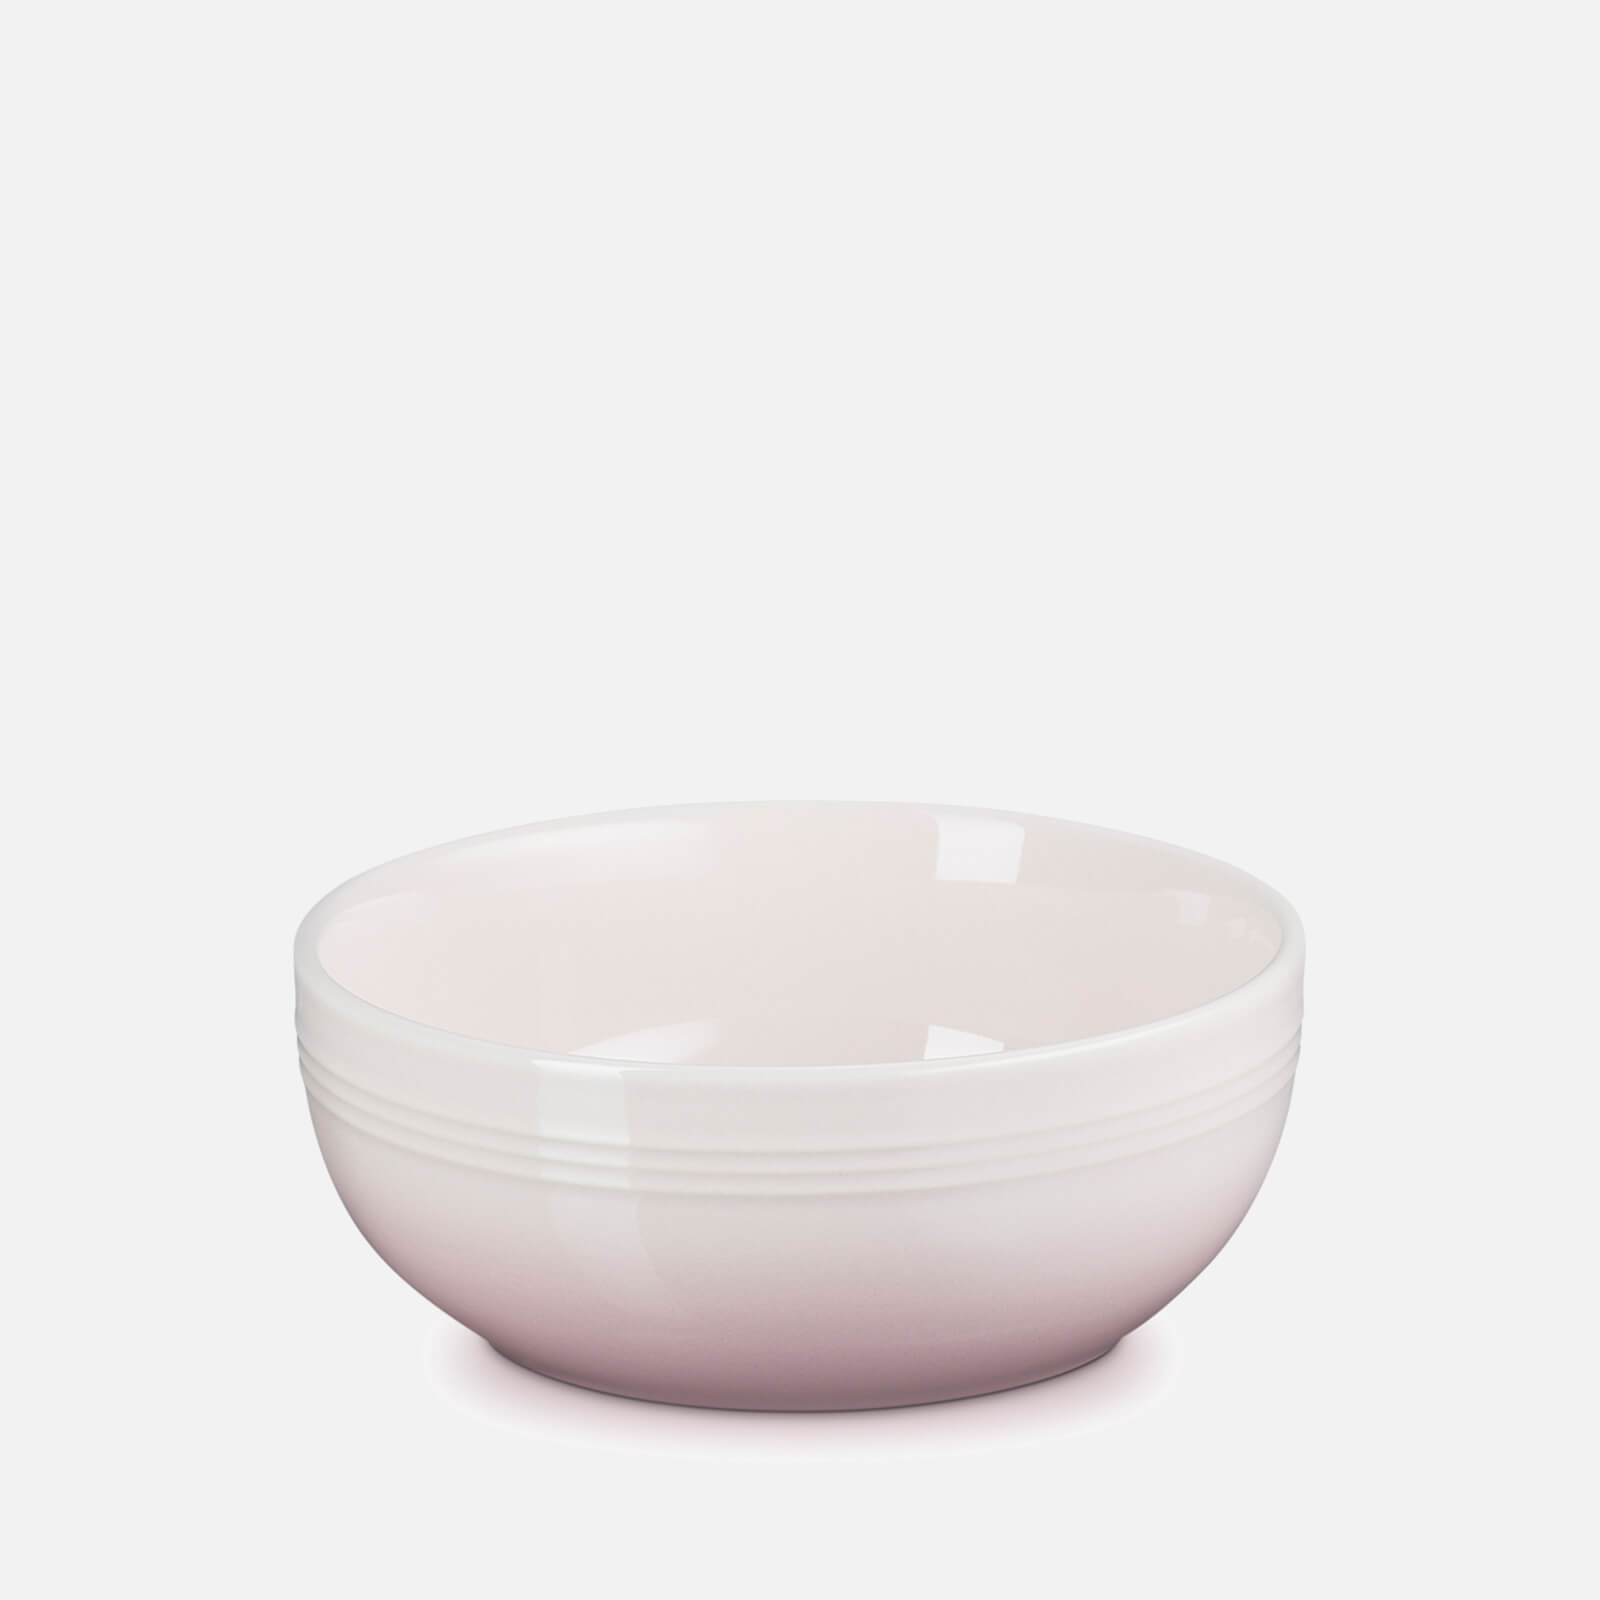 Photos - Salad Bowl / Serving Platter Le Creuset Stoneware Coupe Cereal Bowl - Shell Pink 70157857777080 